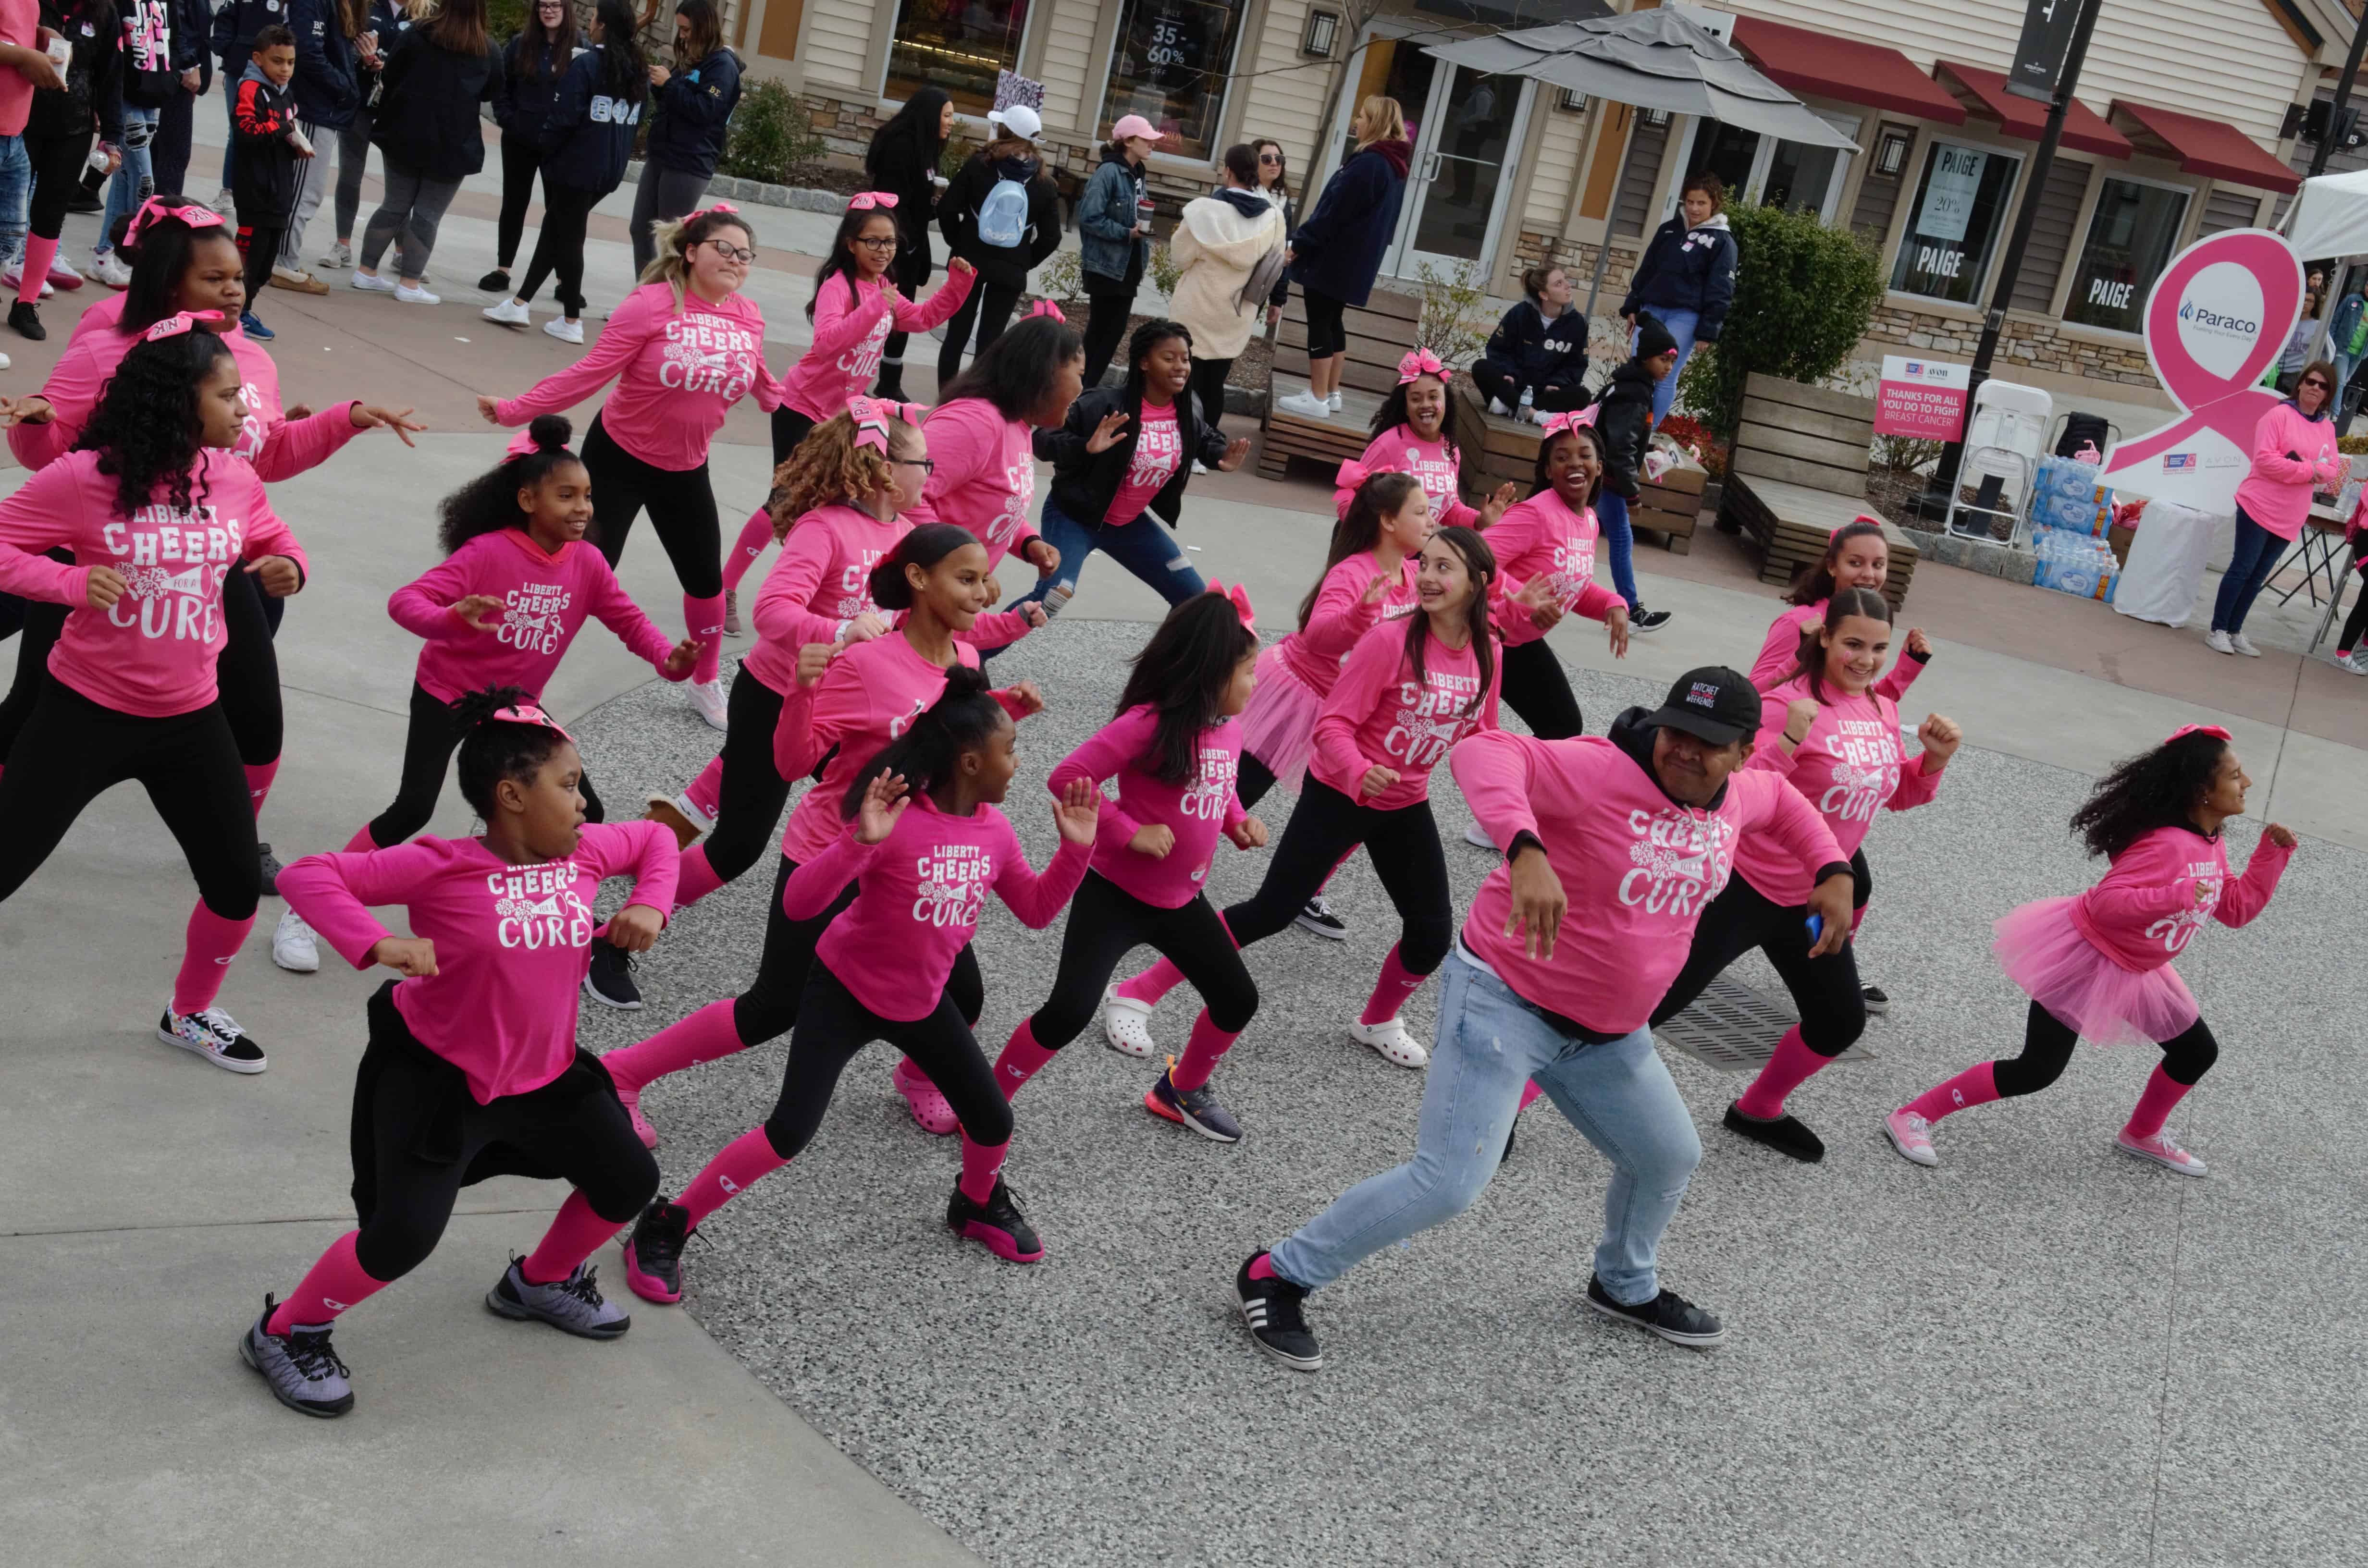 Women dancing and wearing pink shirts for breast cancer awareness